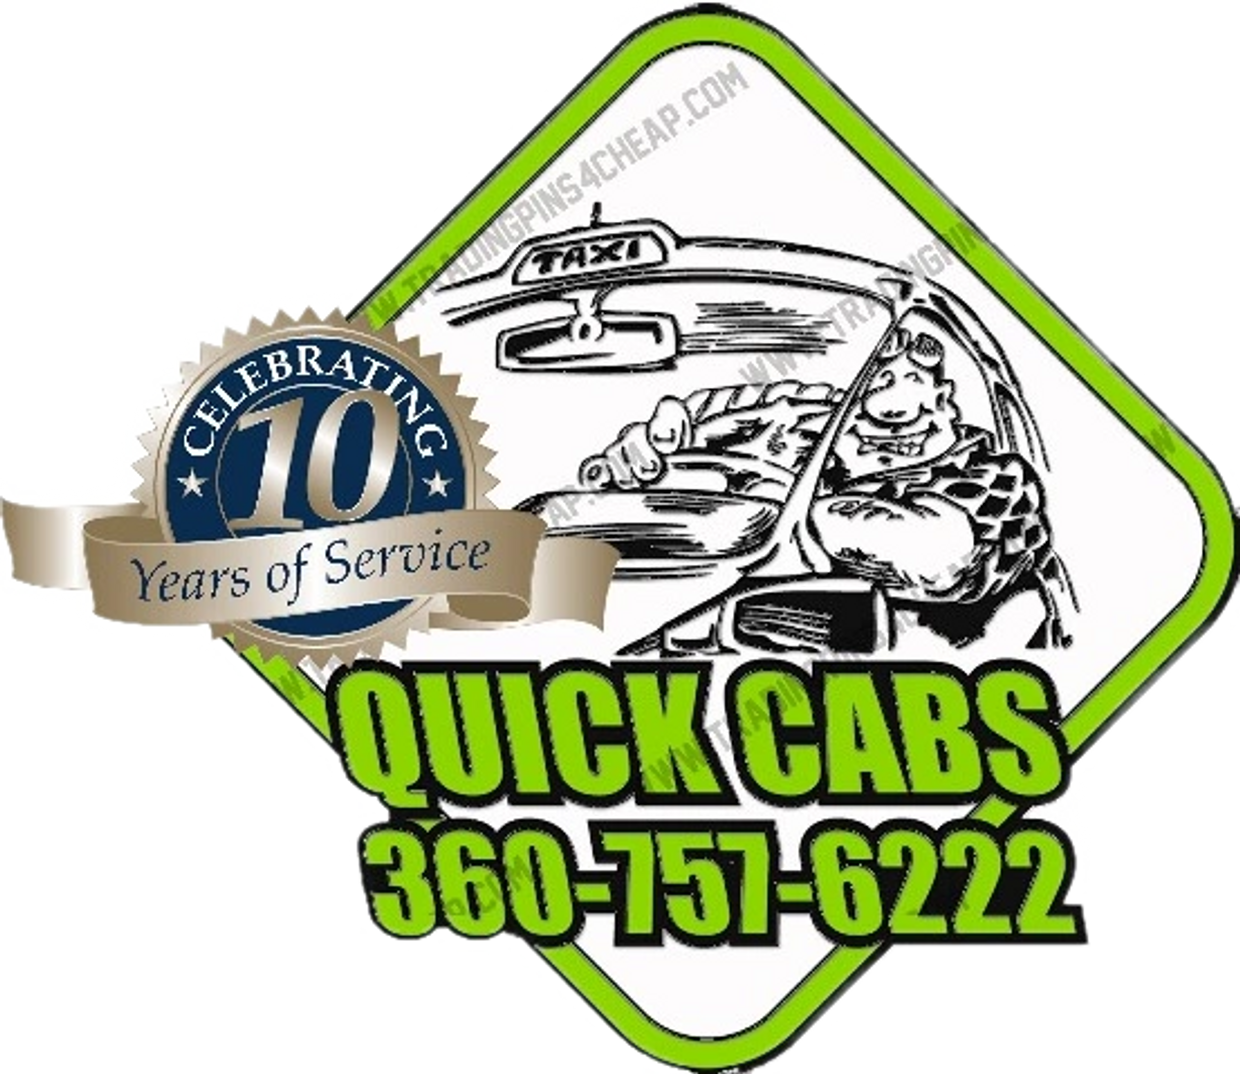 Quick cabs is celebrating its 10 year anniversary.
safe, friendly, Insured and licensed cab service